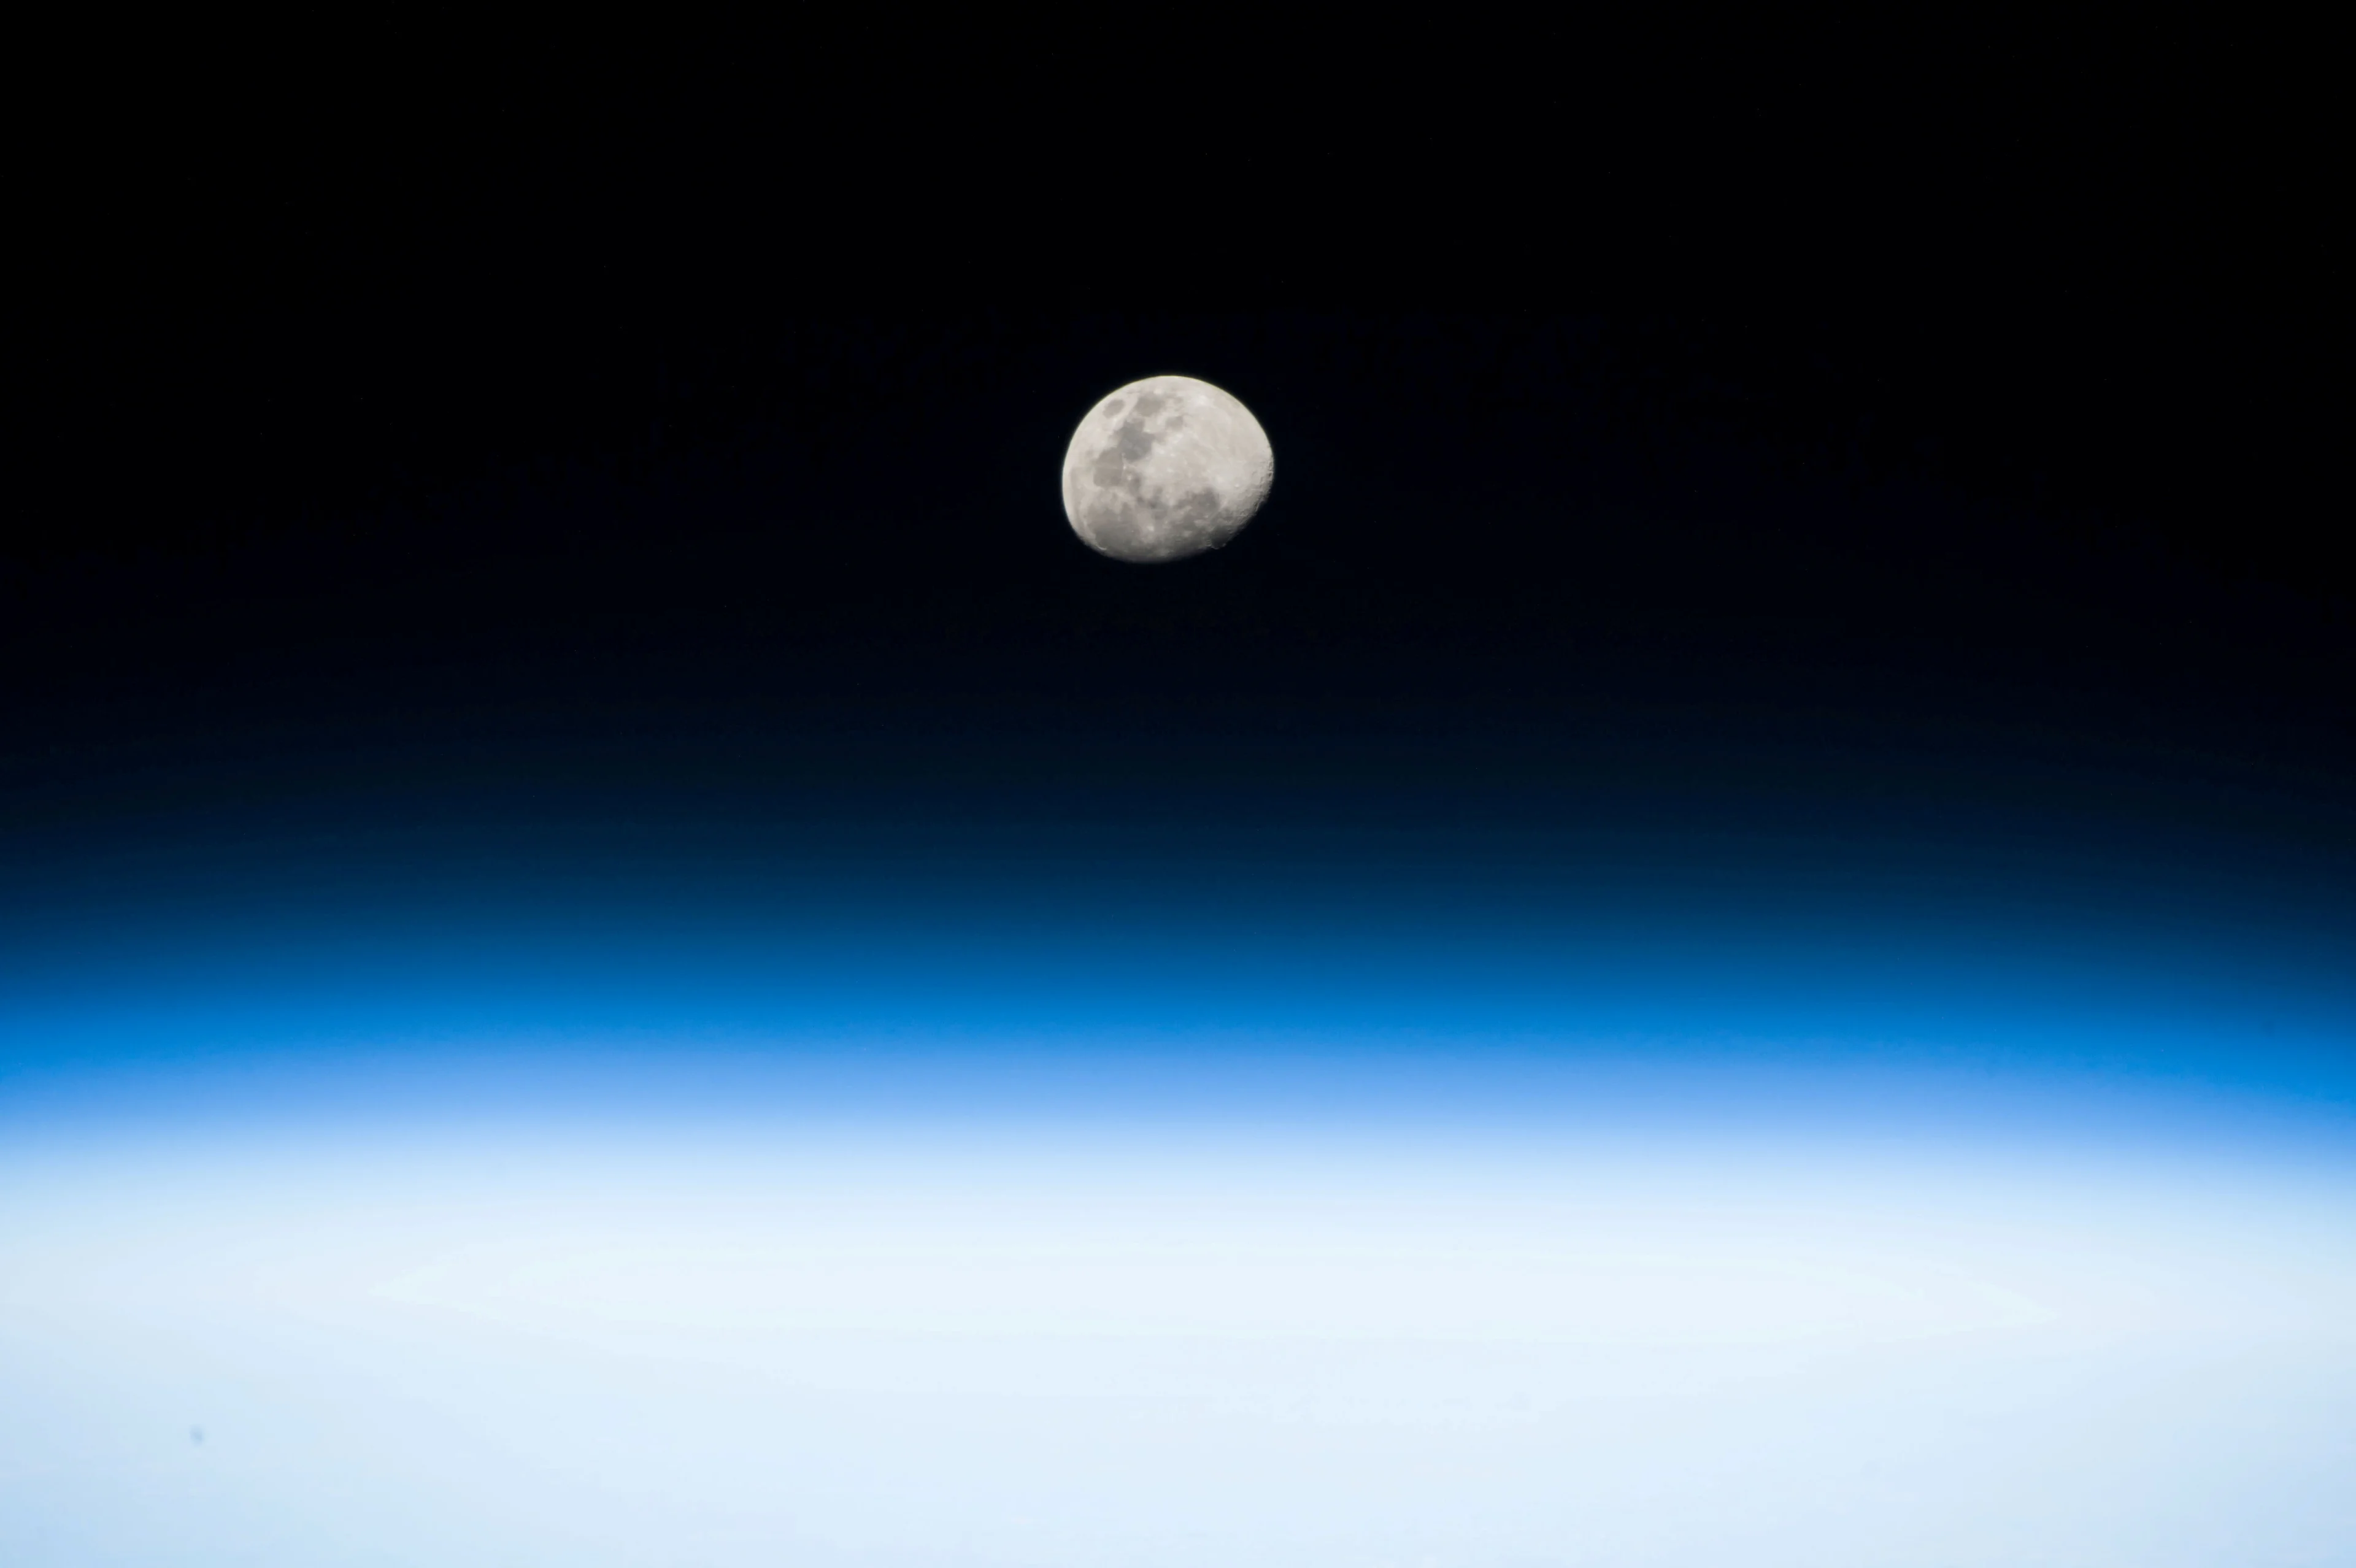 REUTERS: FILE PHOTO: A photo taken by NASA astronaut Randy Bresnik from the International Space Station on August 3, 2017. From his vantage point in low Earth orbit Bresnik pointed his camera toward the rising Moon. NASA/Handout via REUTERS/File Photo